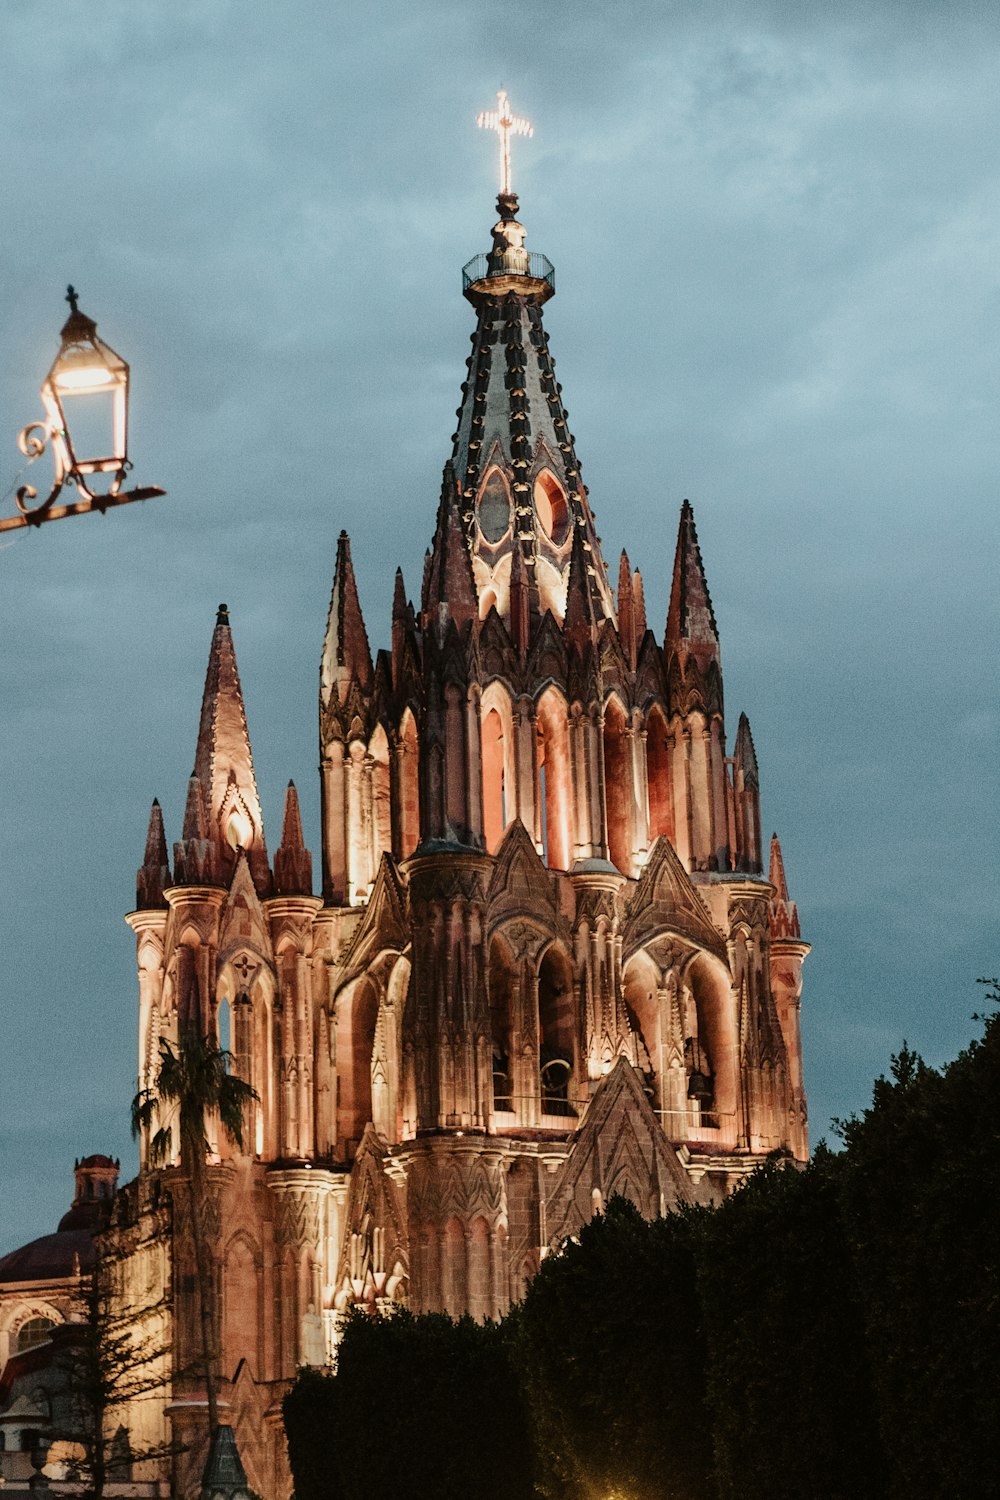 a large cathedral lit up at night under a cloudy sky